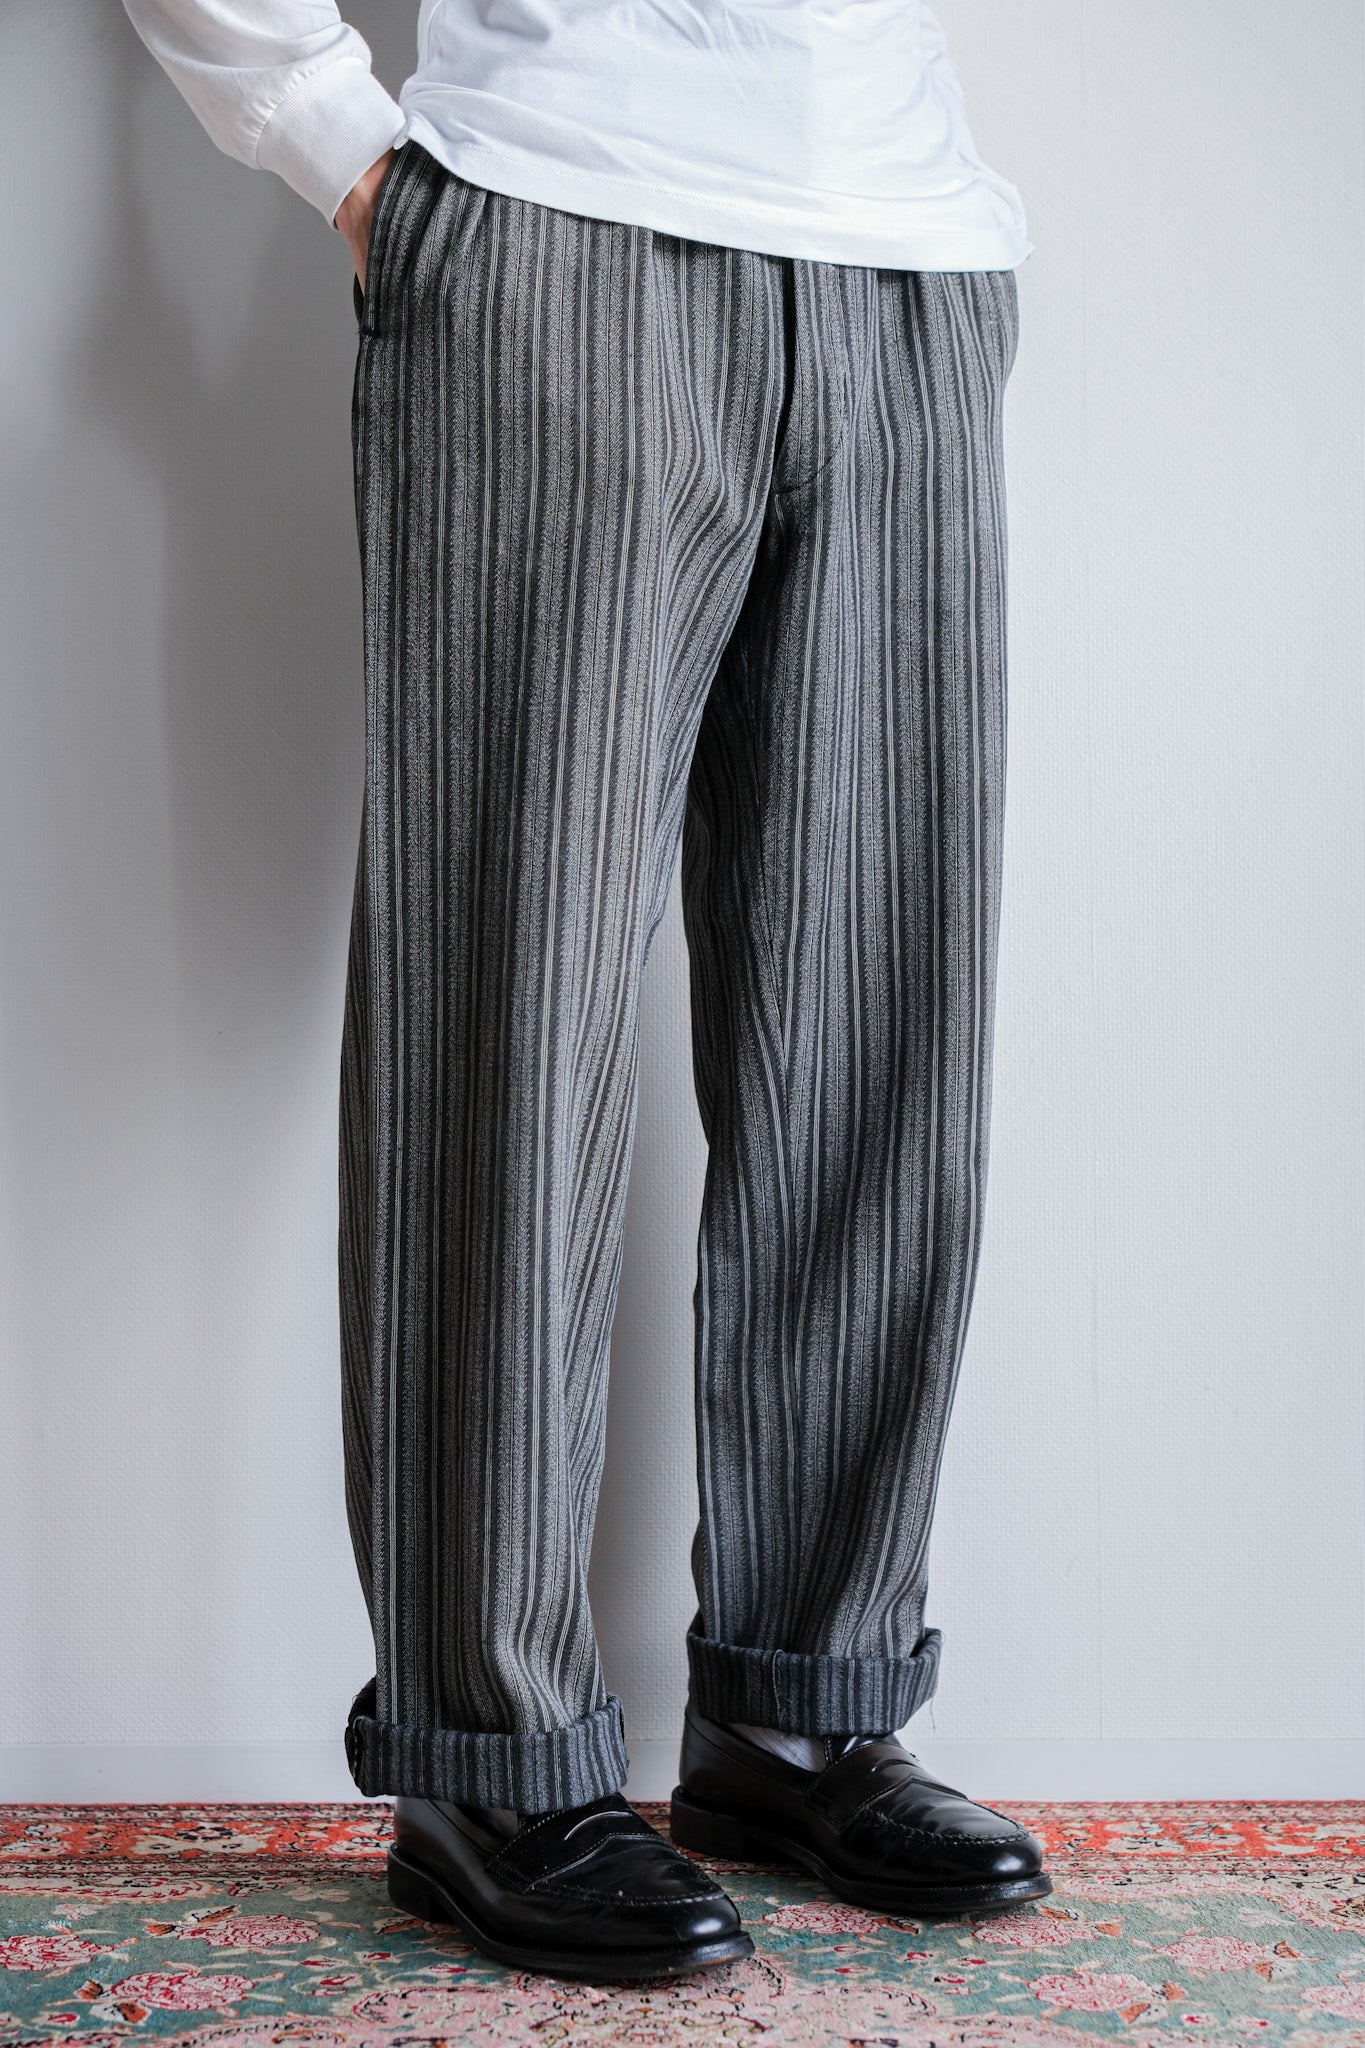 【~50’s】French Vintage 2 Tuck Cotton Striped Work Pants